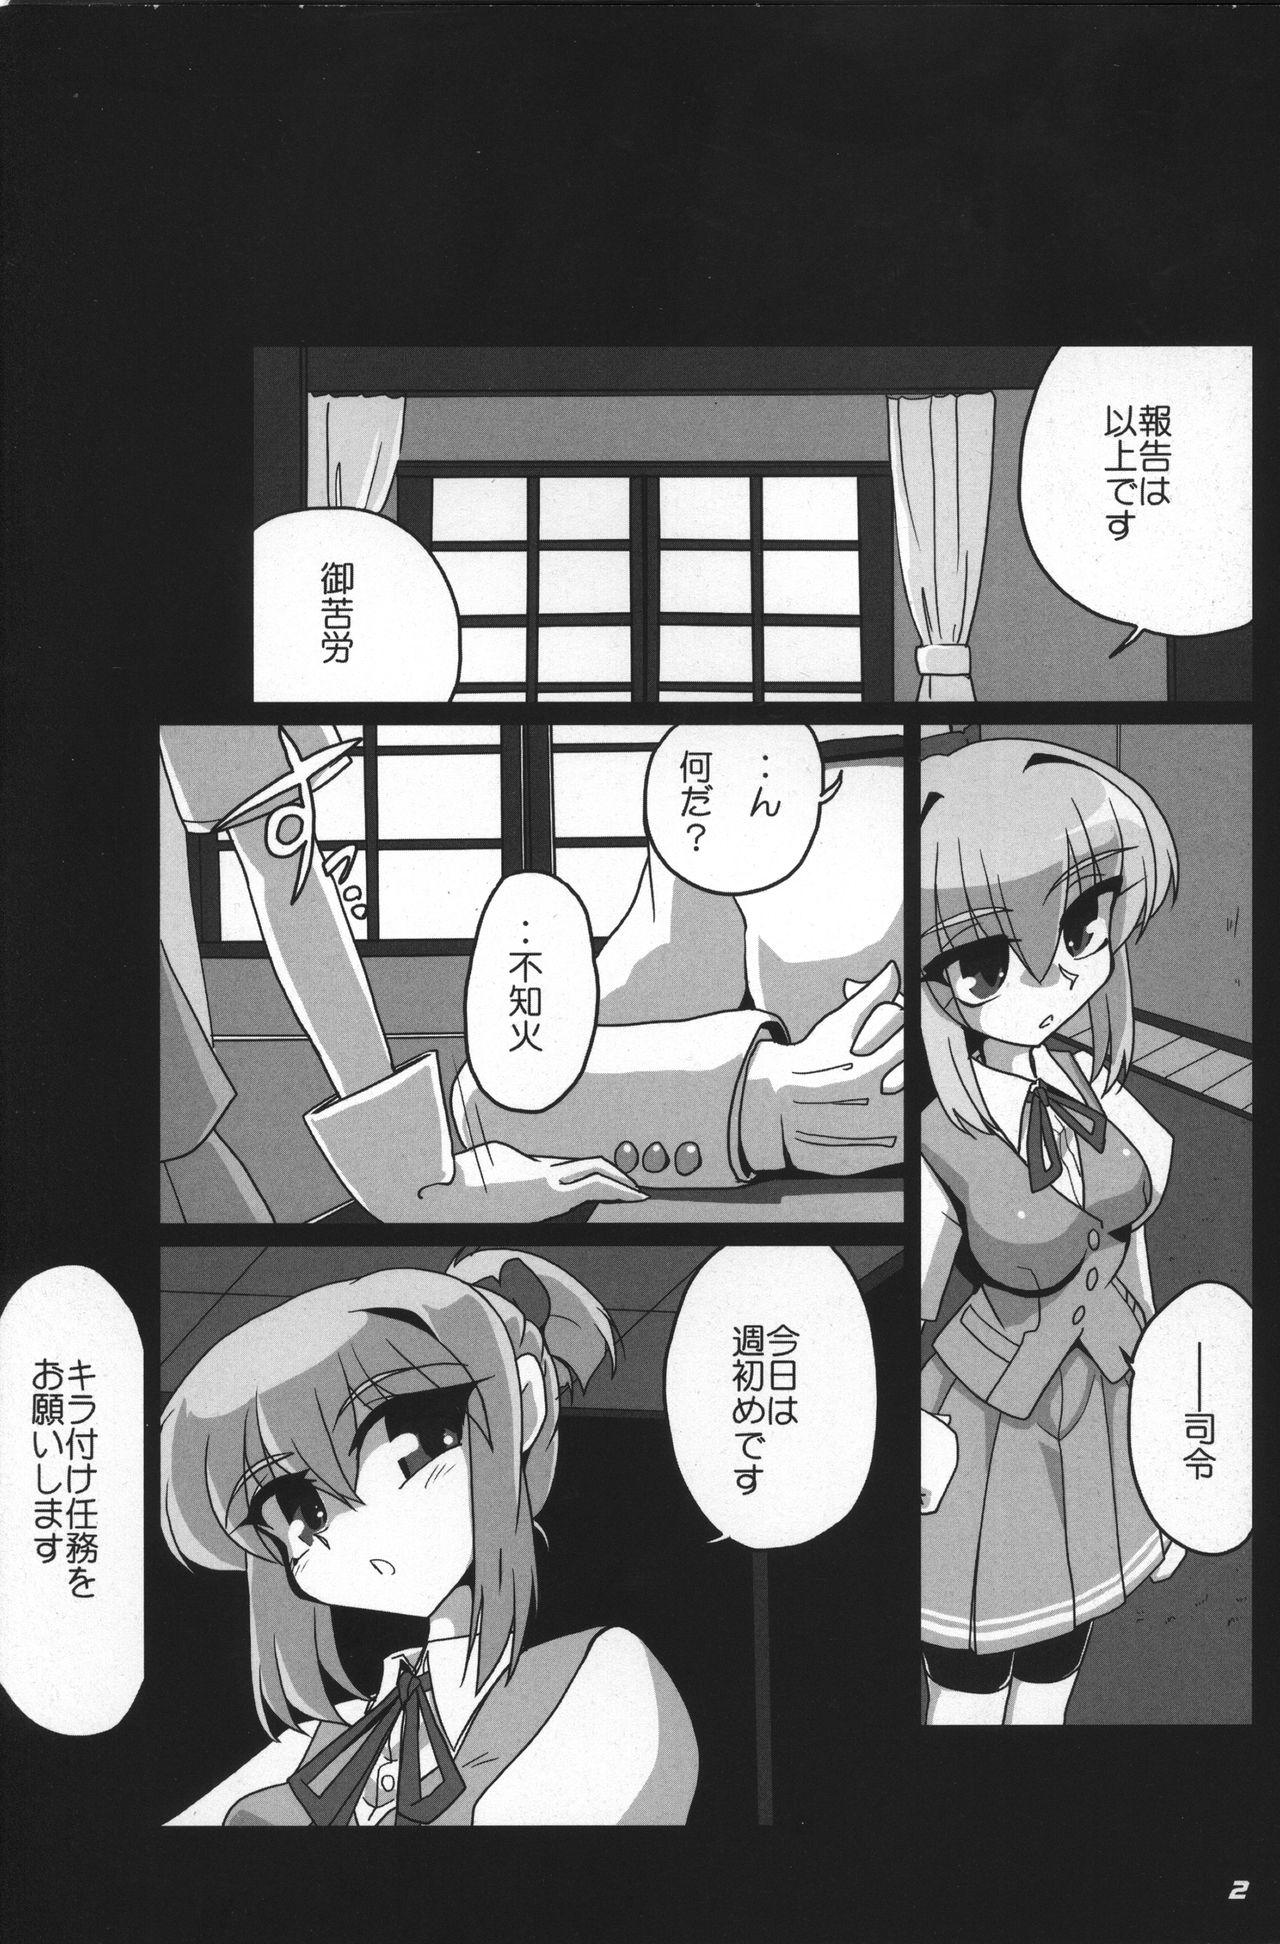 Lolicon KAN-COLLE N+ YAGGY kai - Kantai collection Rubia - Page 3